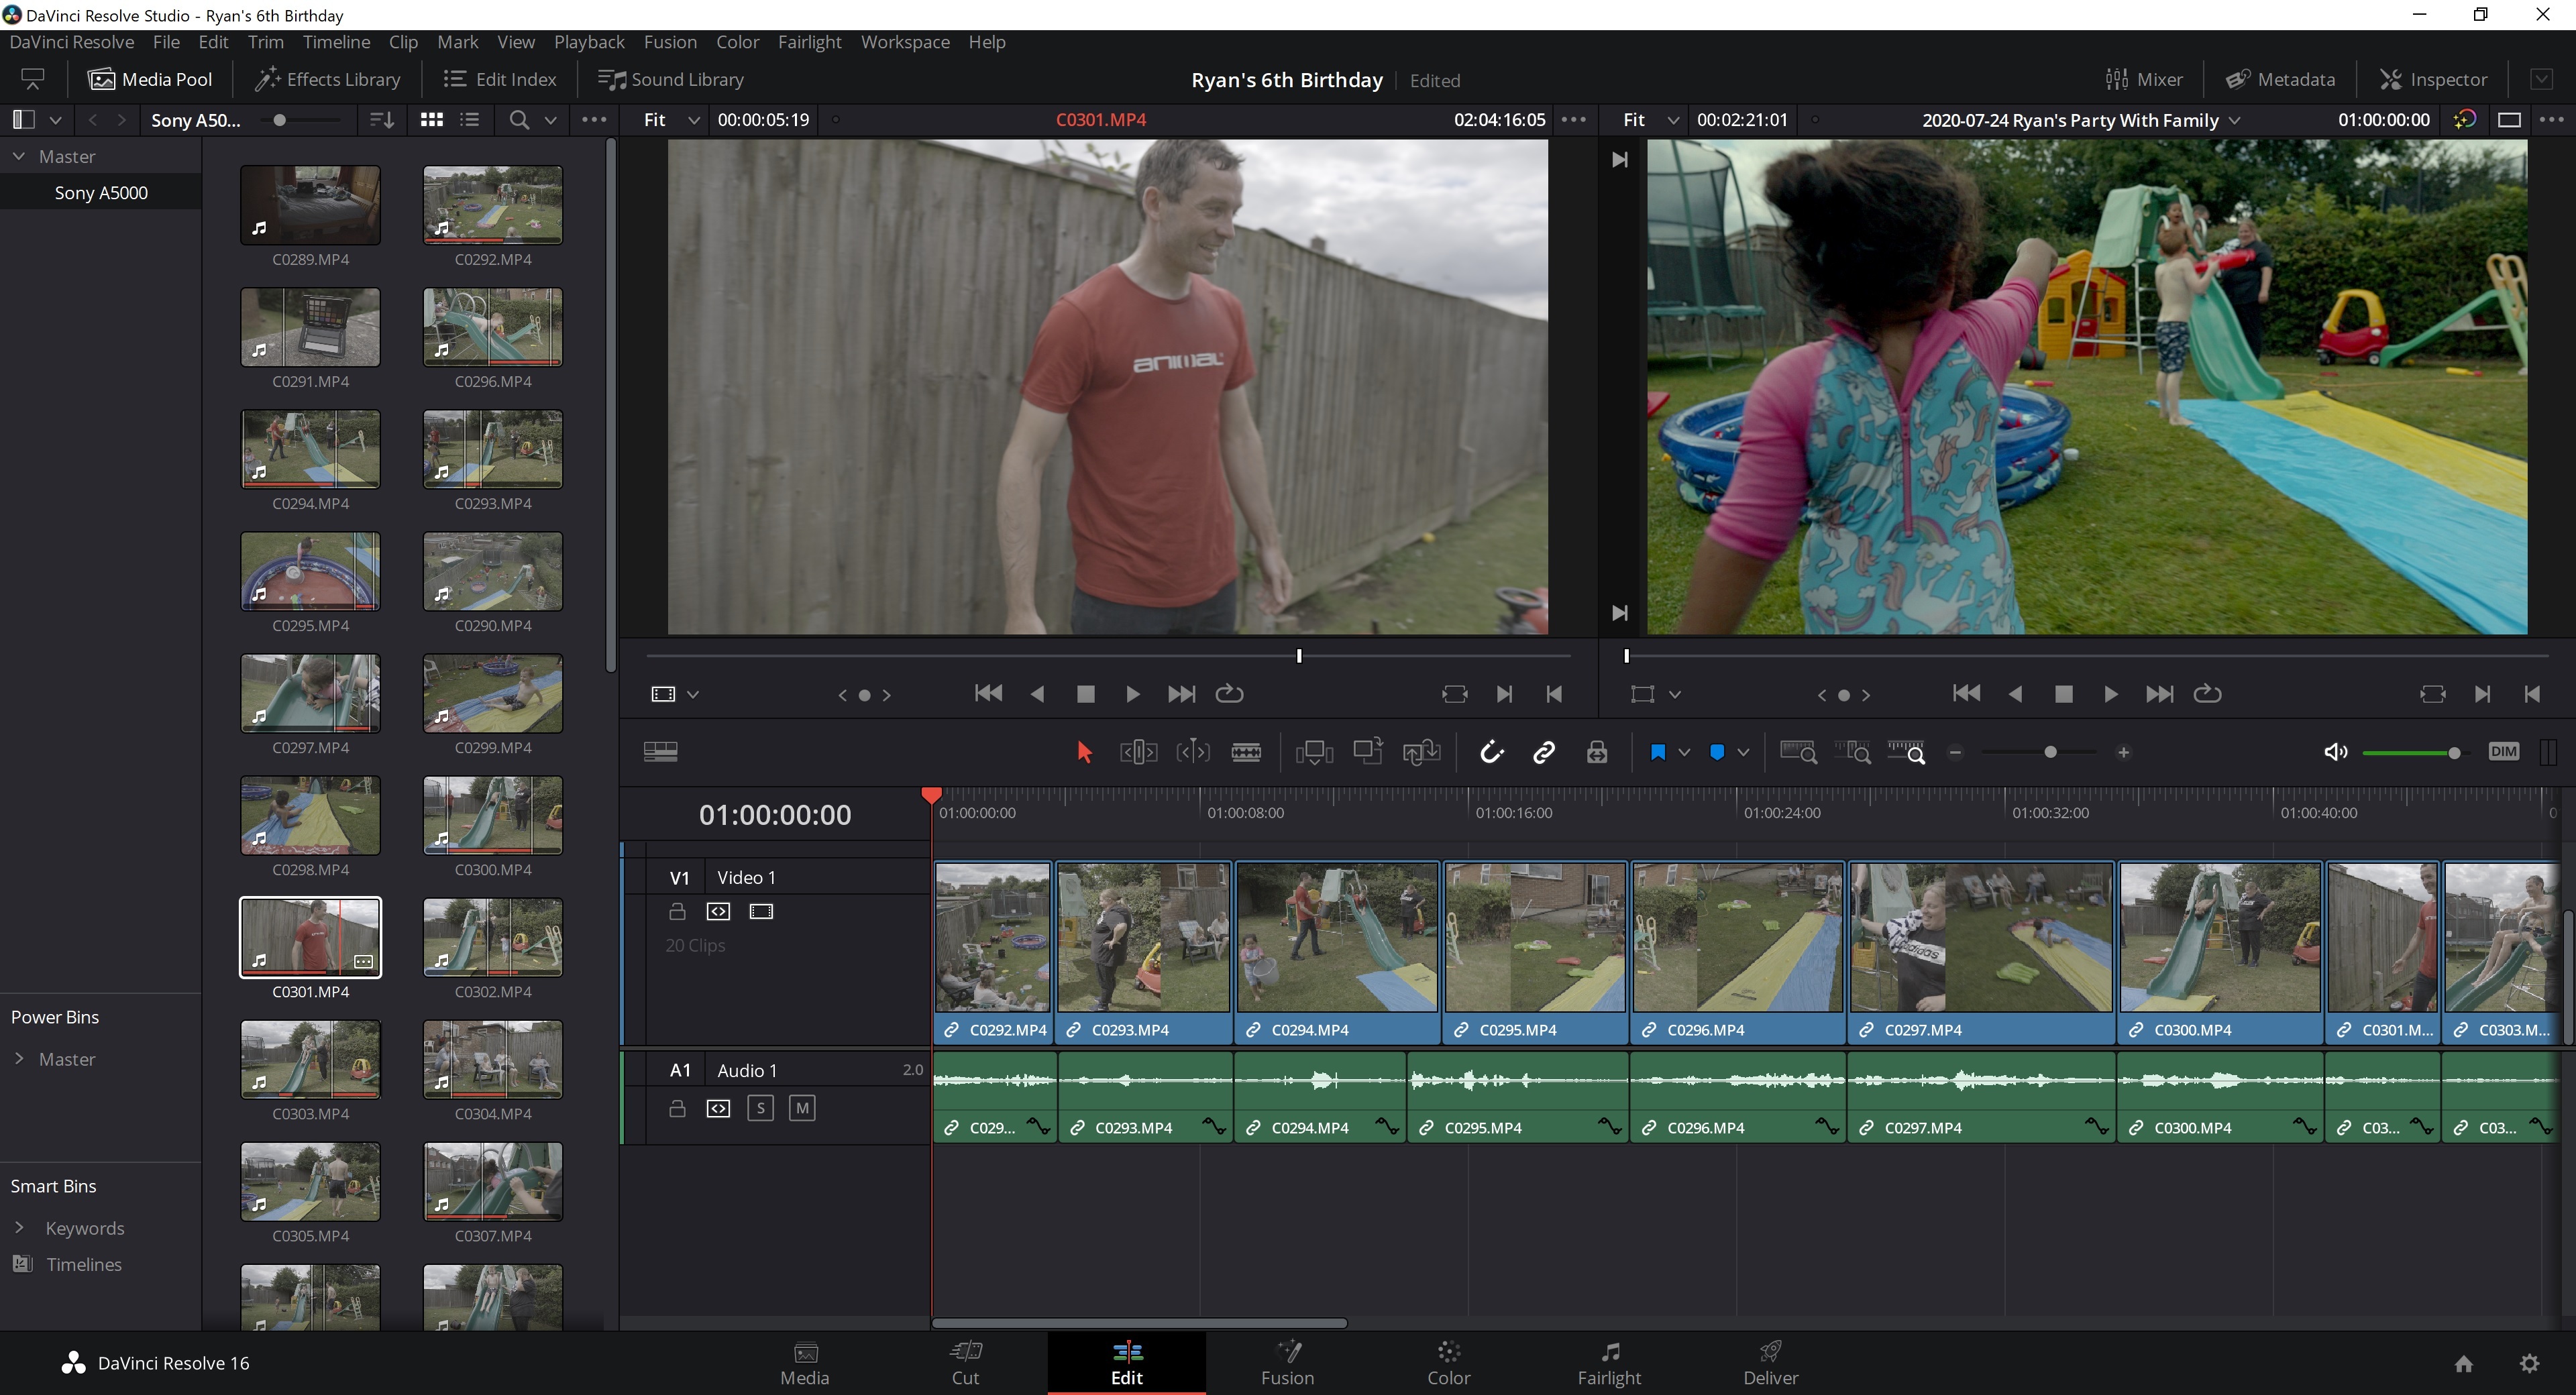 A Video Editor Lets You View and Assemble Your Video Clips Into a Film